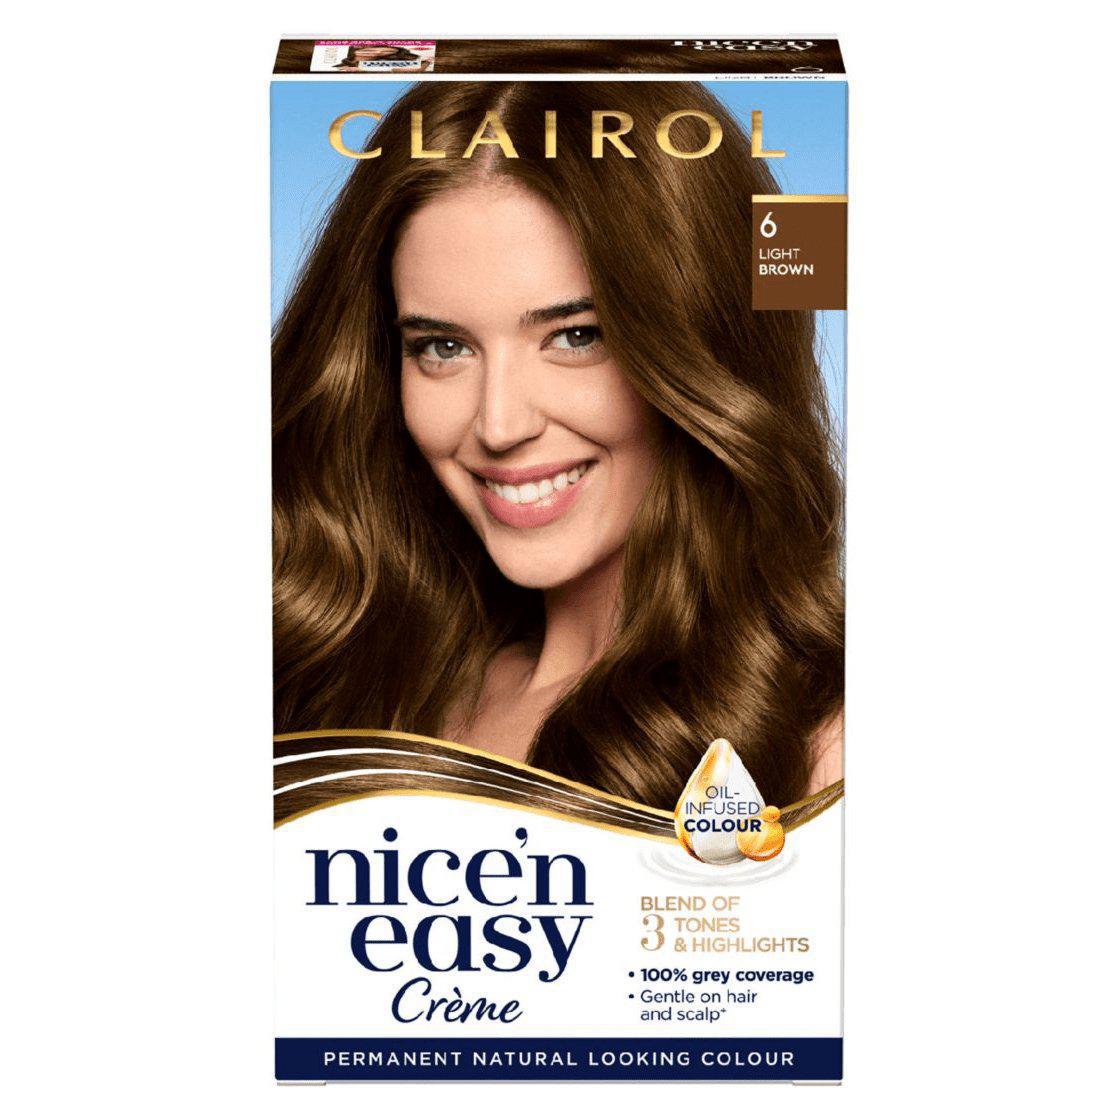 Clairol Nice N Easy Crème Natural Looking Permanent Hair Dye, 6A Light Ash Brown - Healthxpress.ie